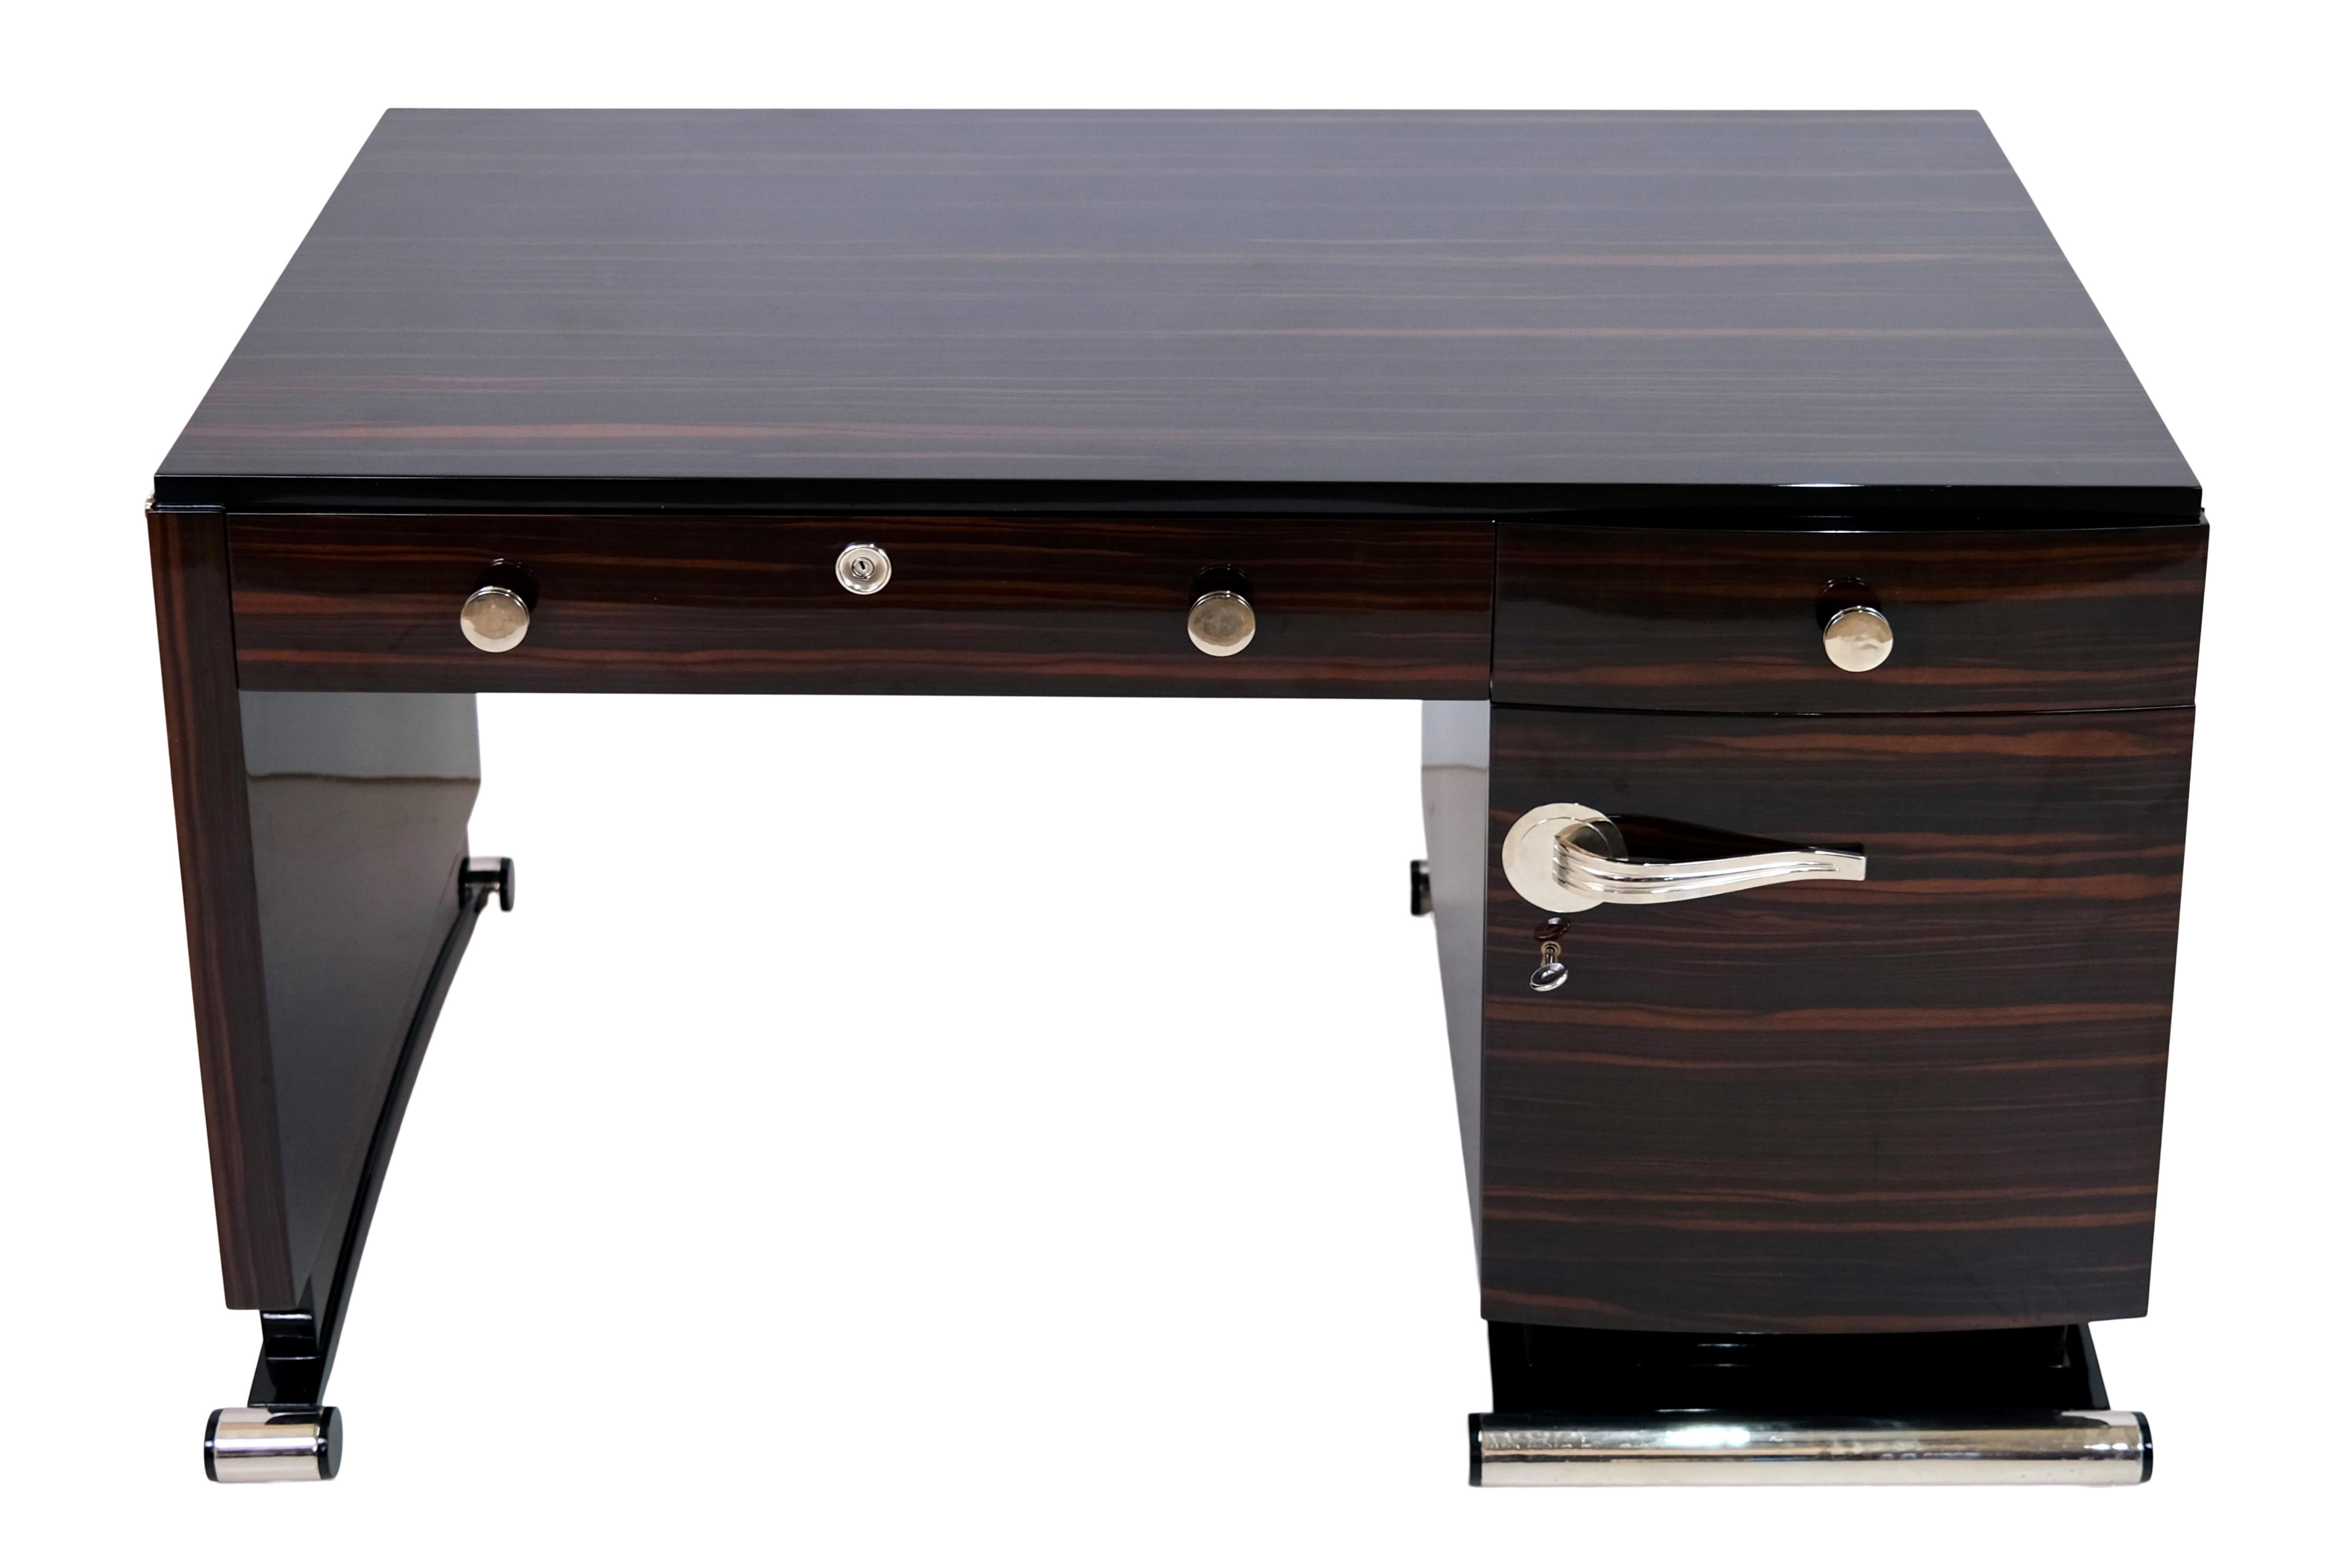 Desk in Makassar, high-gloss lacquer finish
The desk rests on curved legs
All metals original, chromed
Curved fitting on the door
Drawers across the entire width

Original Art Deco, France 1930s

Dimensions:
Width: 130 cm
Height: 75